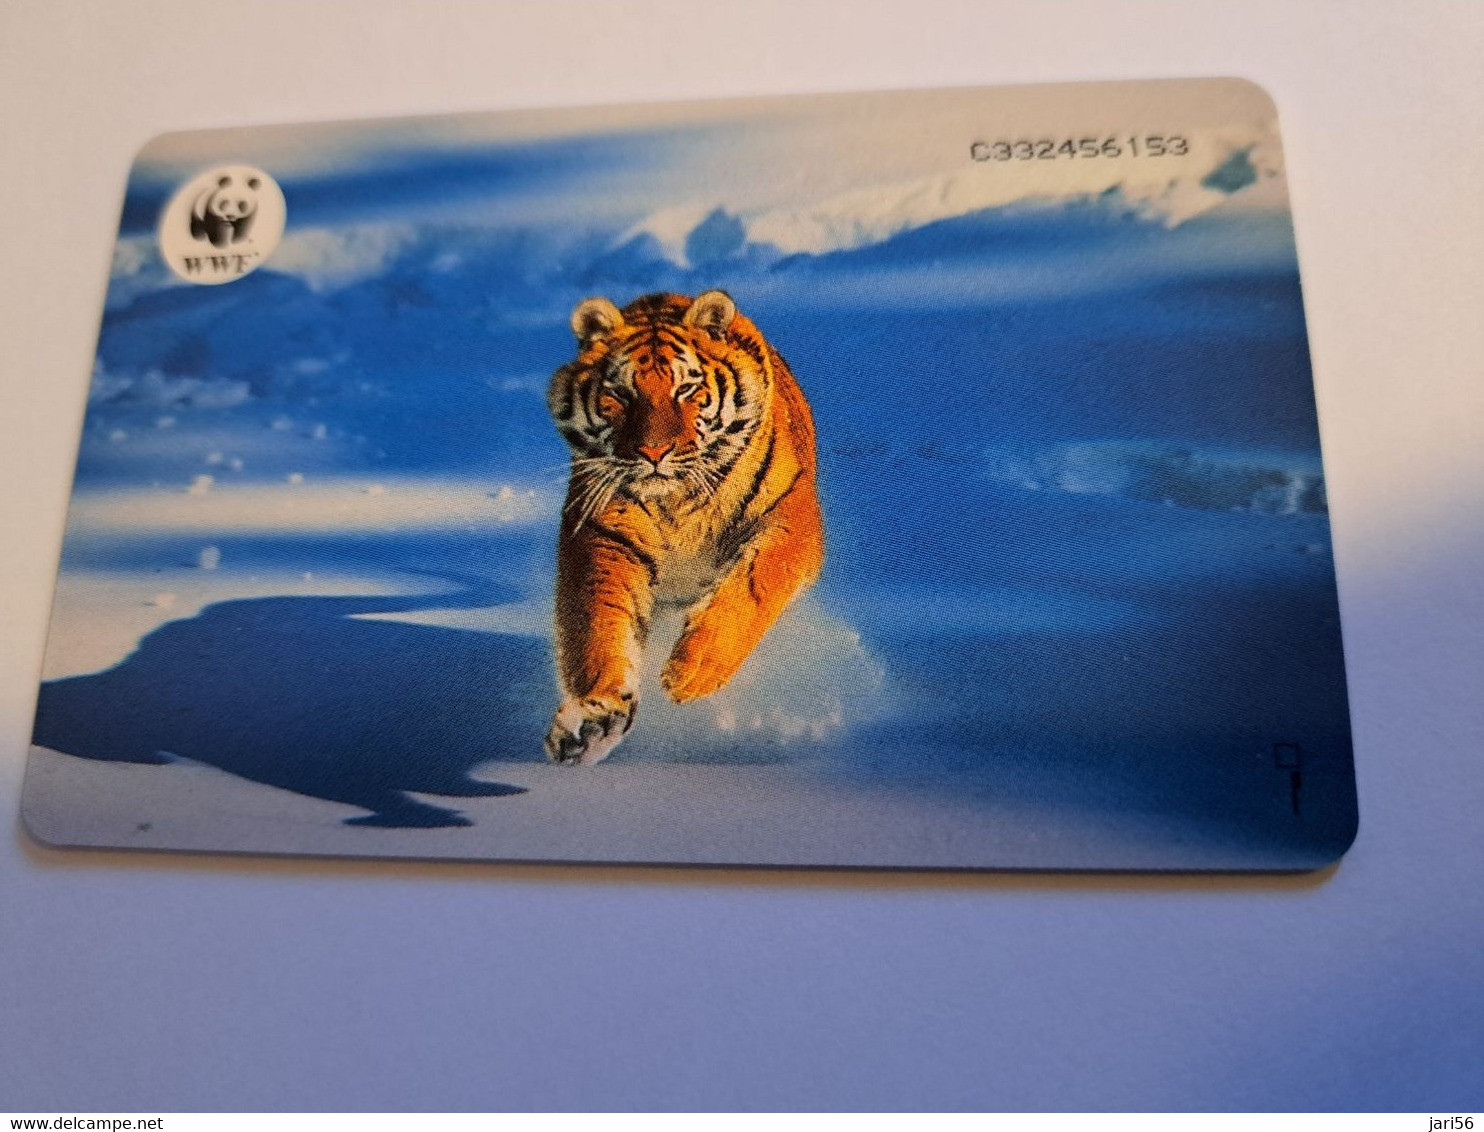 NETHERLANDS / WWF/WNF 1x TIGER/TIGRE  / CHIP ADVERTISING /DIFFICULT /  HFL 2,50 /CRD 531.01  MINT !!  ** 11987** - Privadas